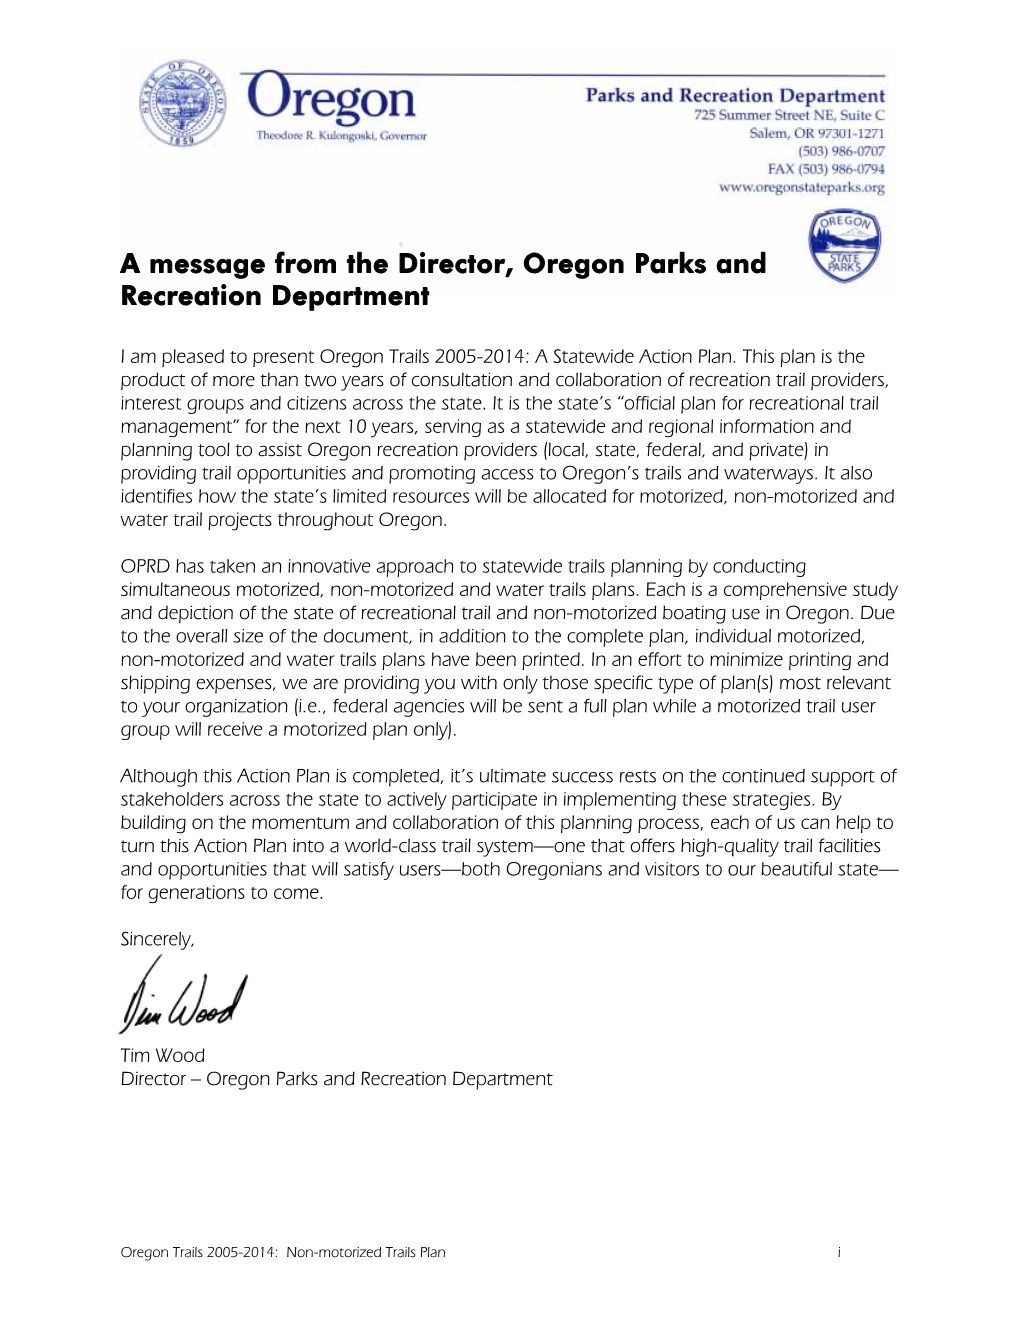 A Message from the Director, Oregon Parks and Recreation Department